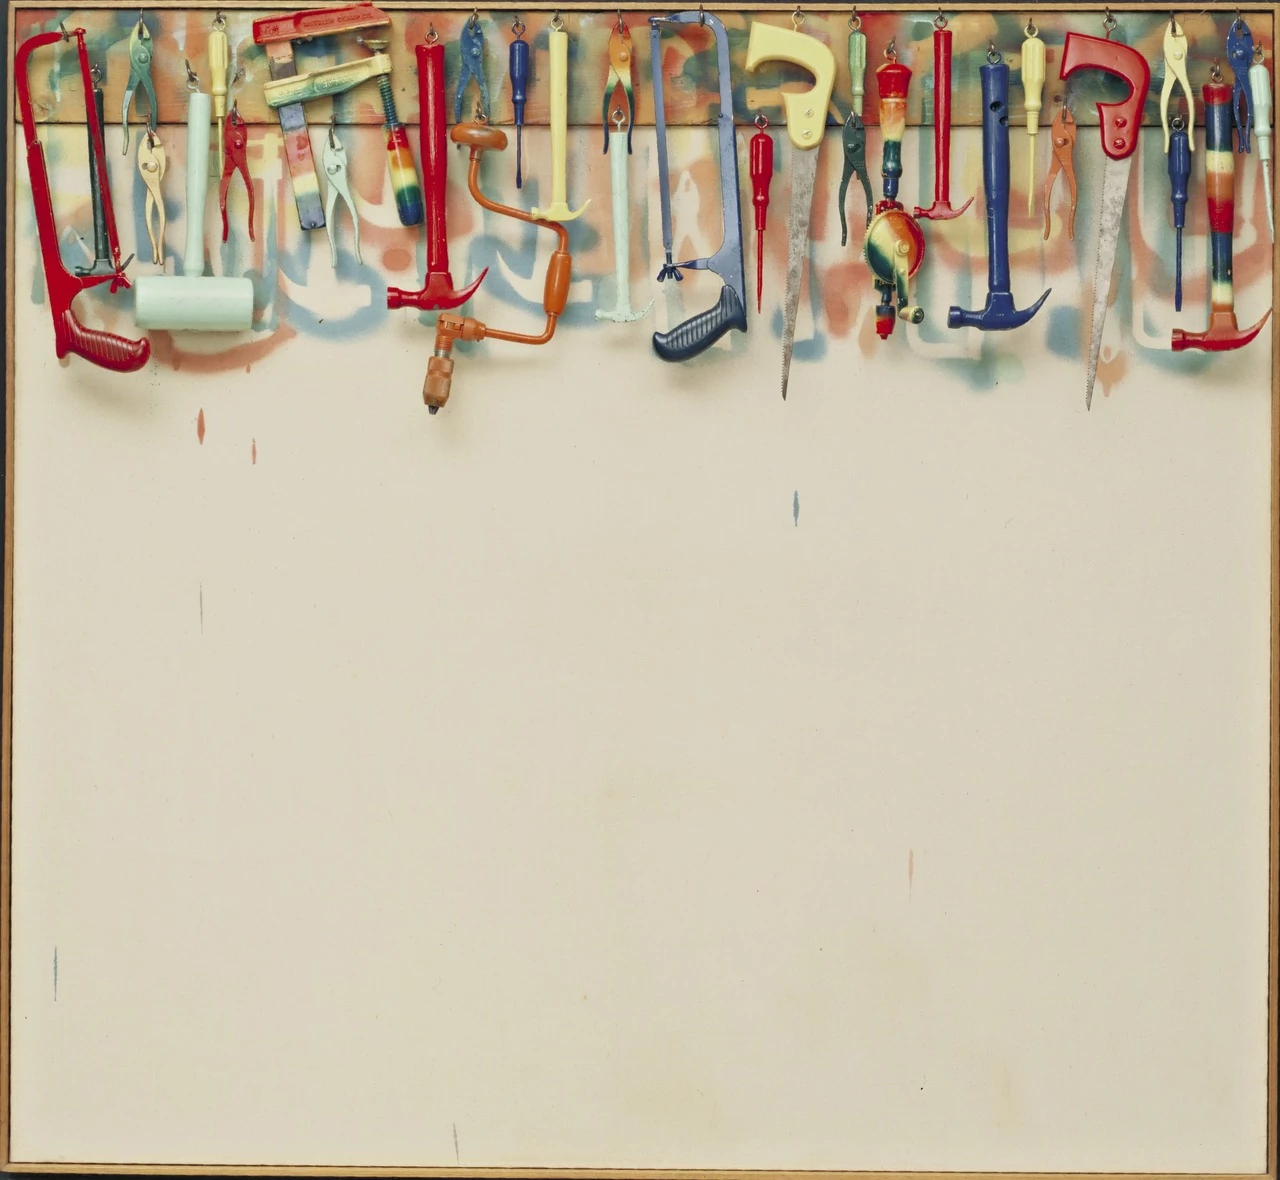 Five Feet of Colorful Tools, Jim Dine